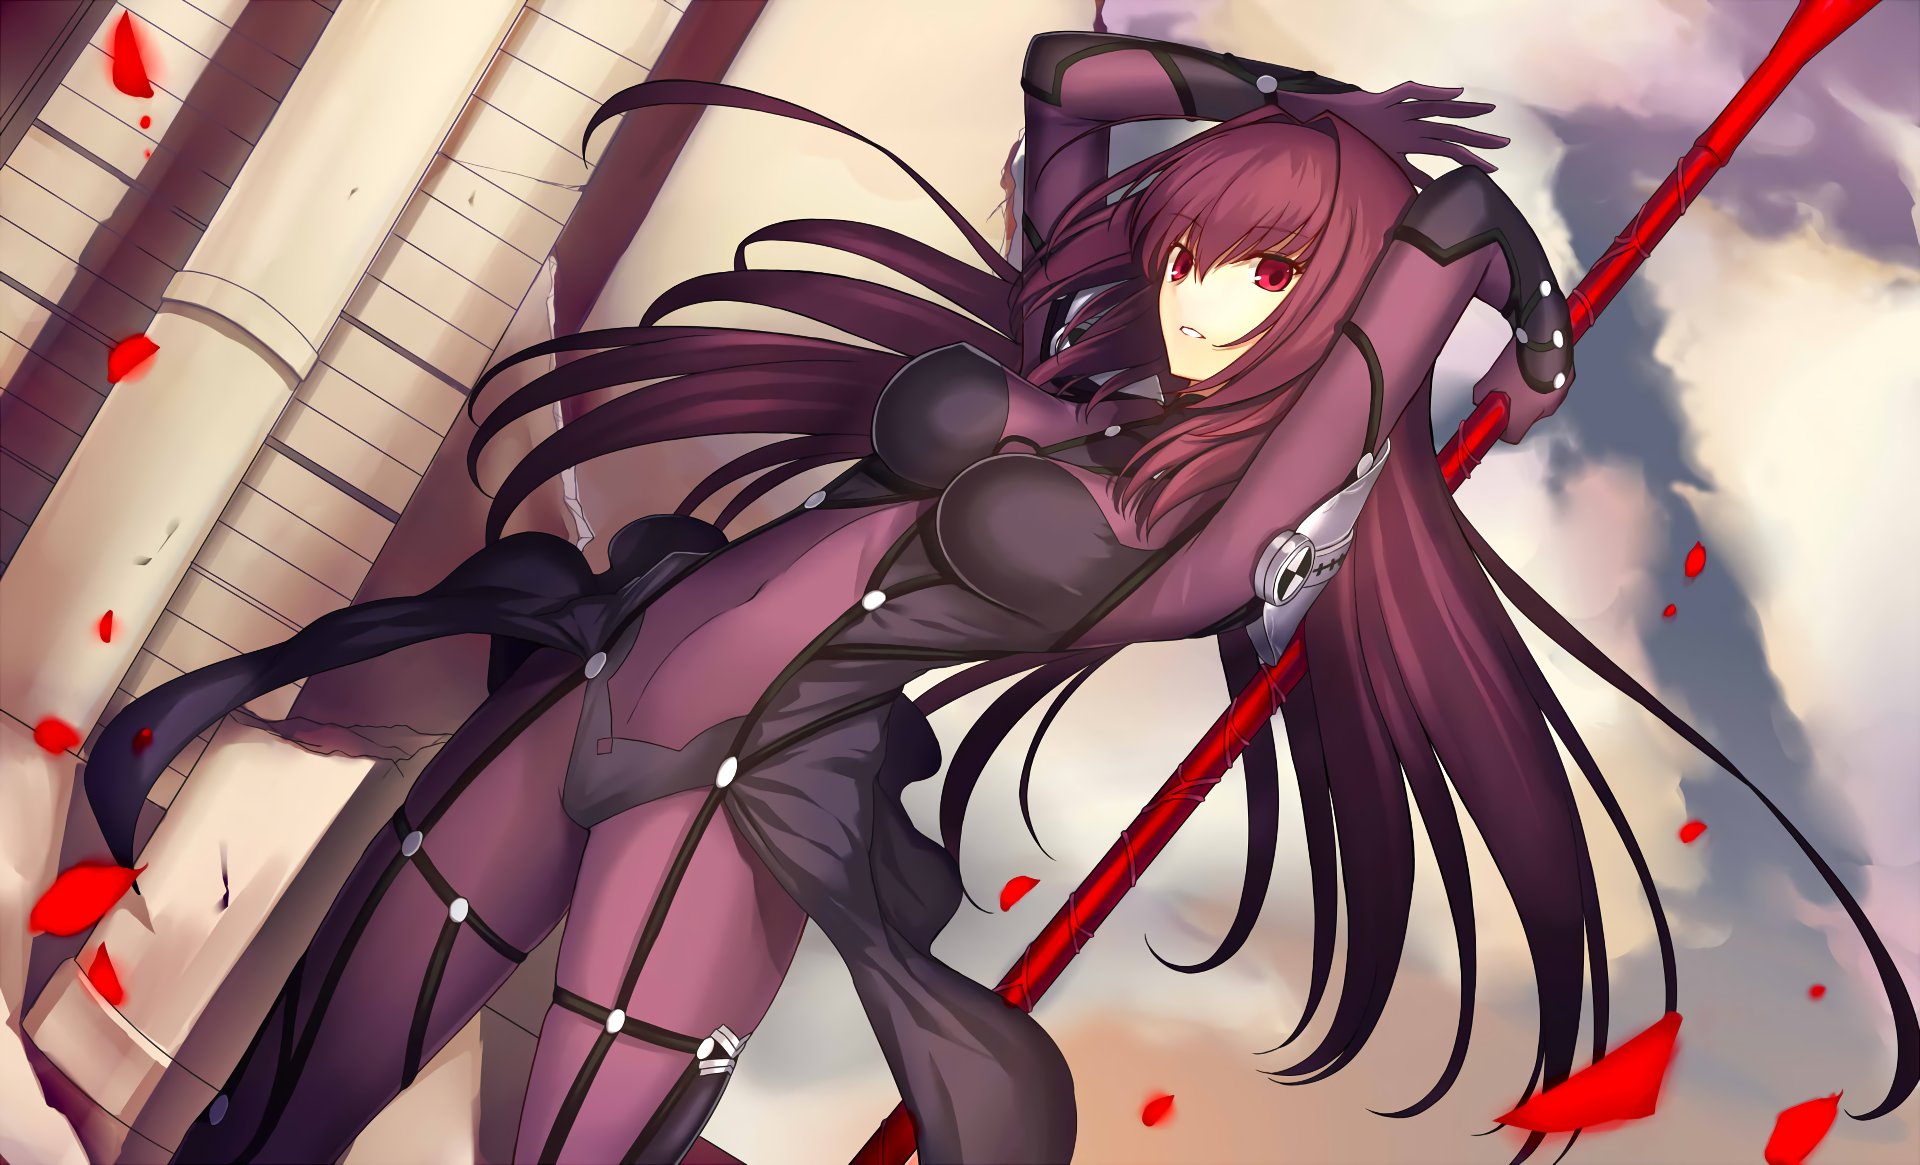 HD desktop wallpaper of Scathach from Fate/Grand Order, featuring her in a dynamic pose with long flowing hair, holding a spear against a backdrop of a cloudy sky and scattered red petals.